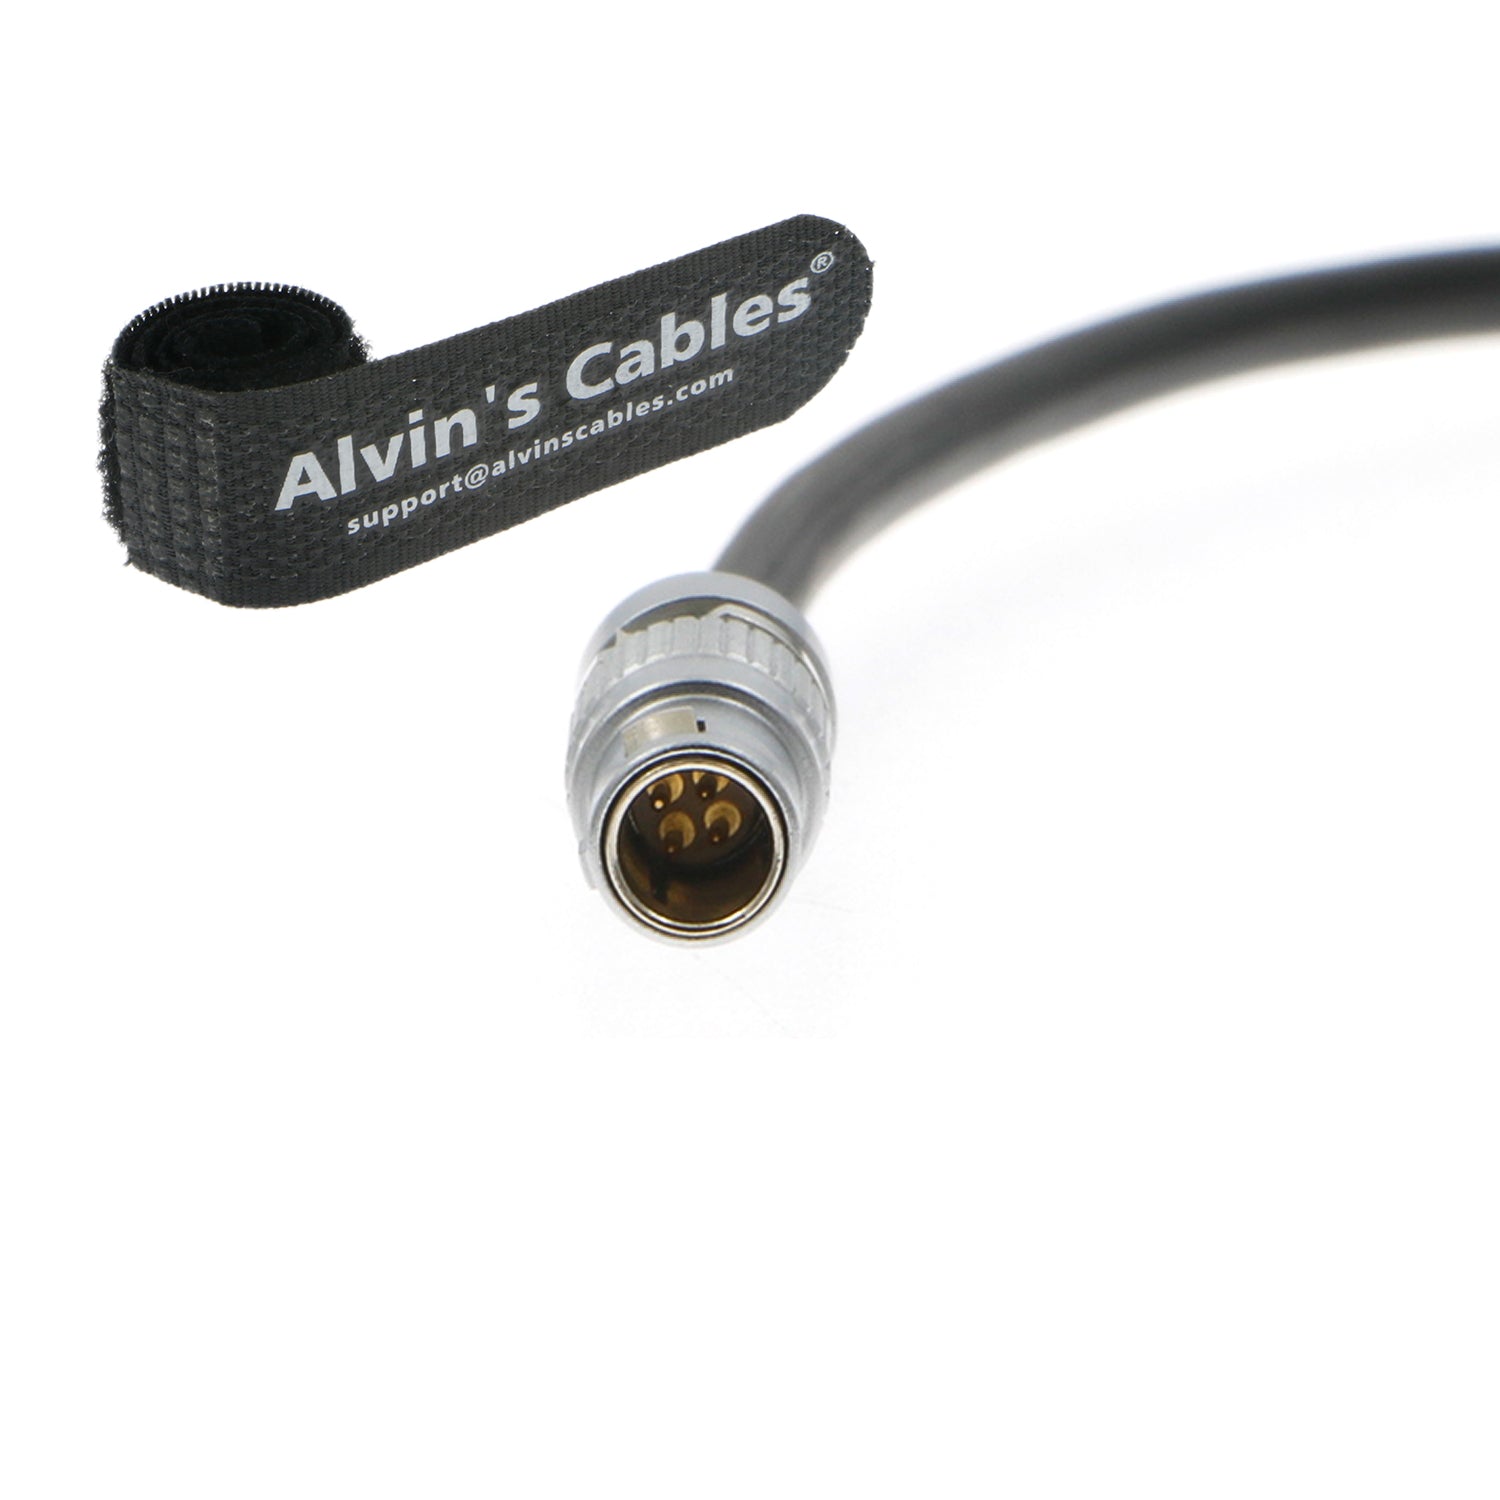 Alvin’s Cables Control-Cable for SMALLHD Focus PRO Monitor to RED DSMC2 Epic Scarlet Camera 5 Pin to 4 Pin Ctrl Cable 44cm| 17.3inches